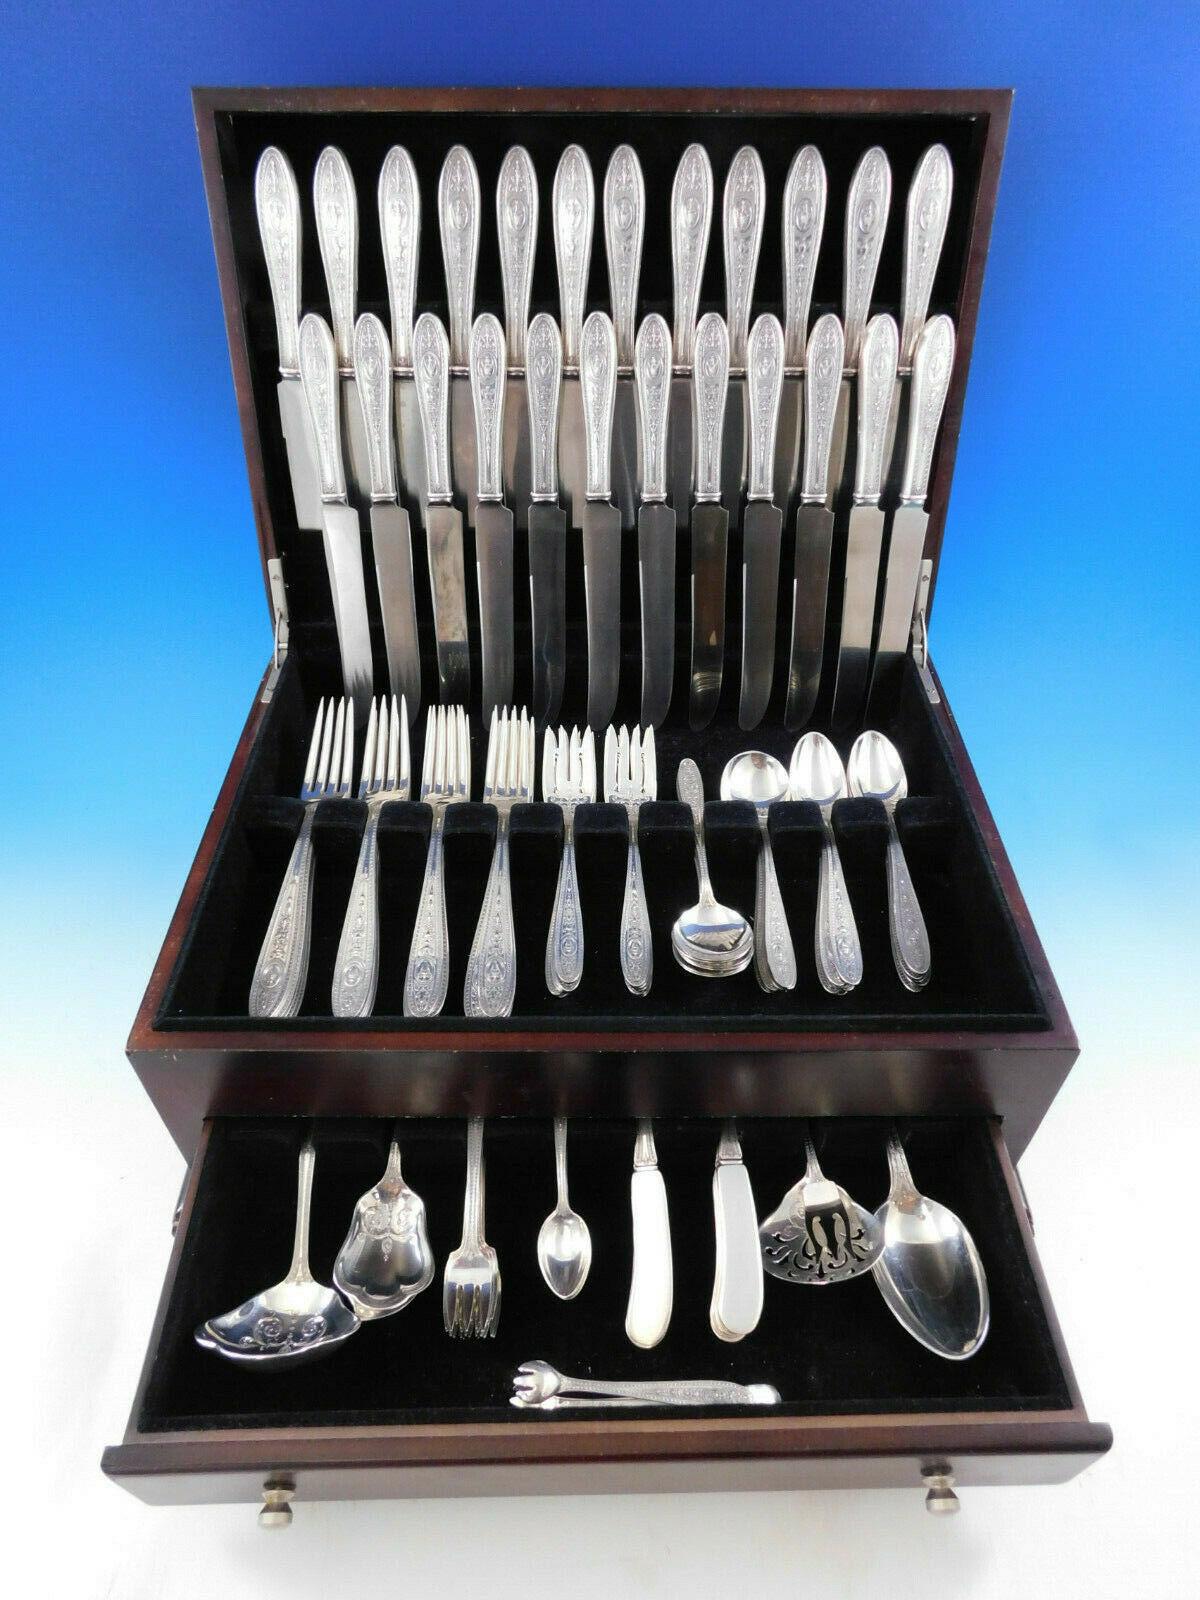 Outstanding dinner size Wedgwood by International Sterling Silver flatware set - 128 pieces. This set includes:

12 dinner size knives, 9 5/8